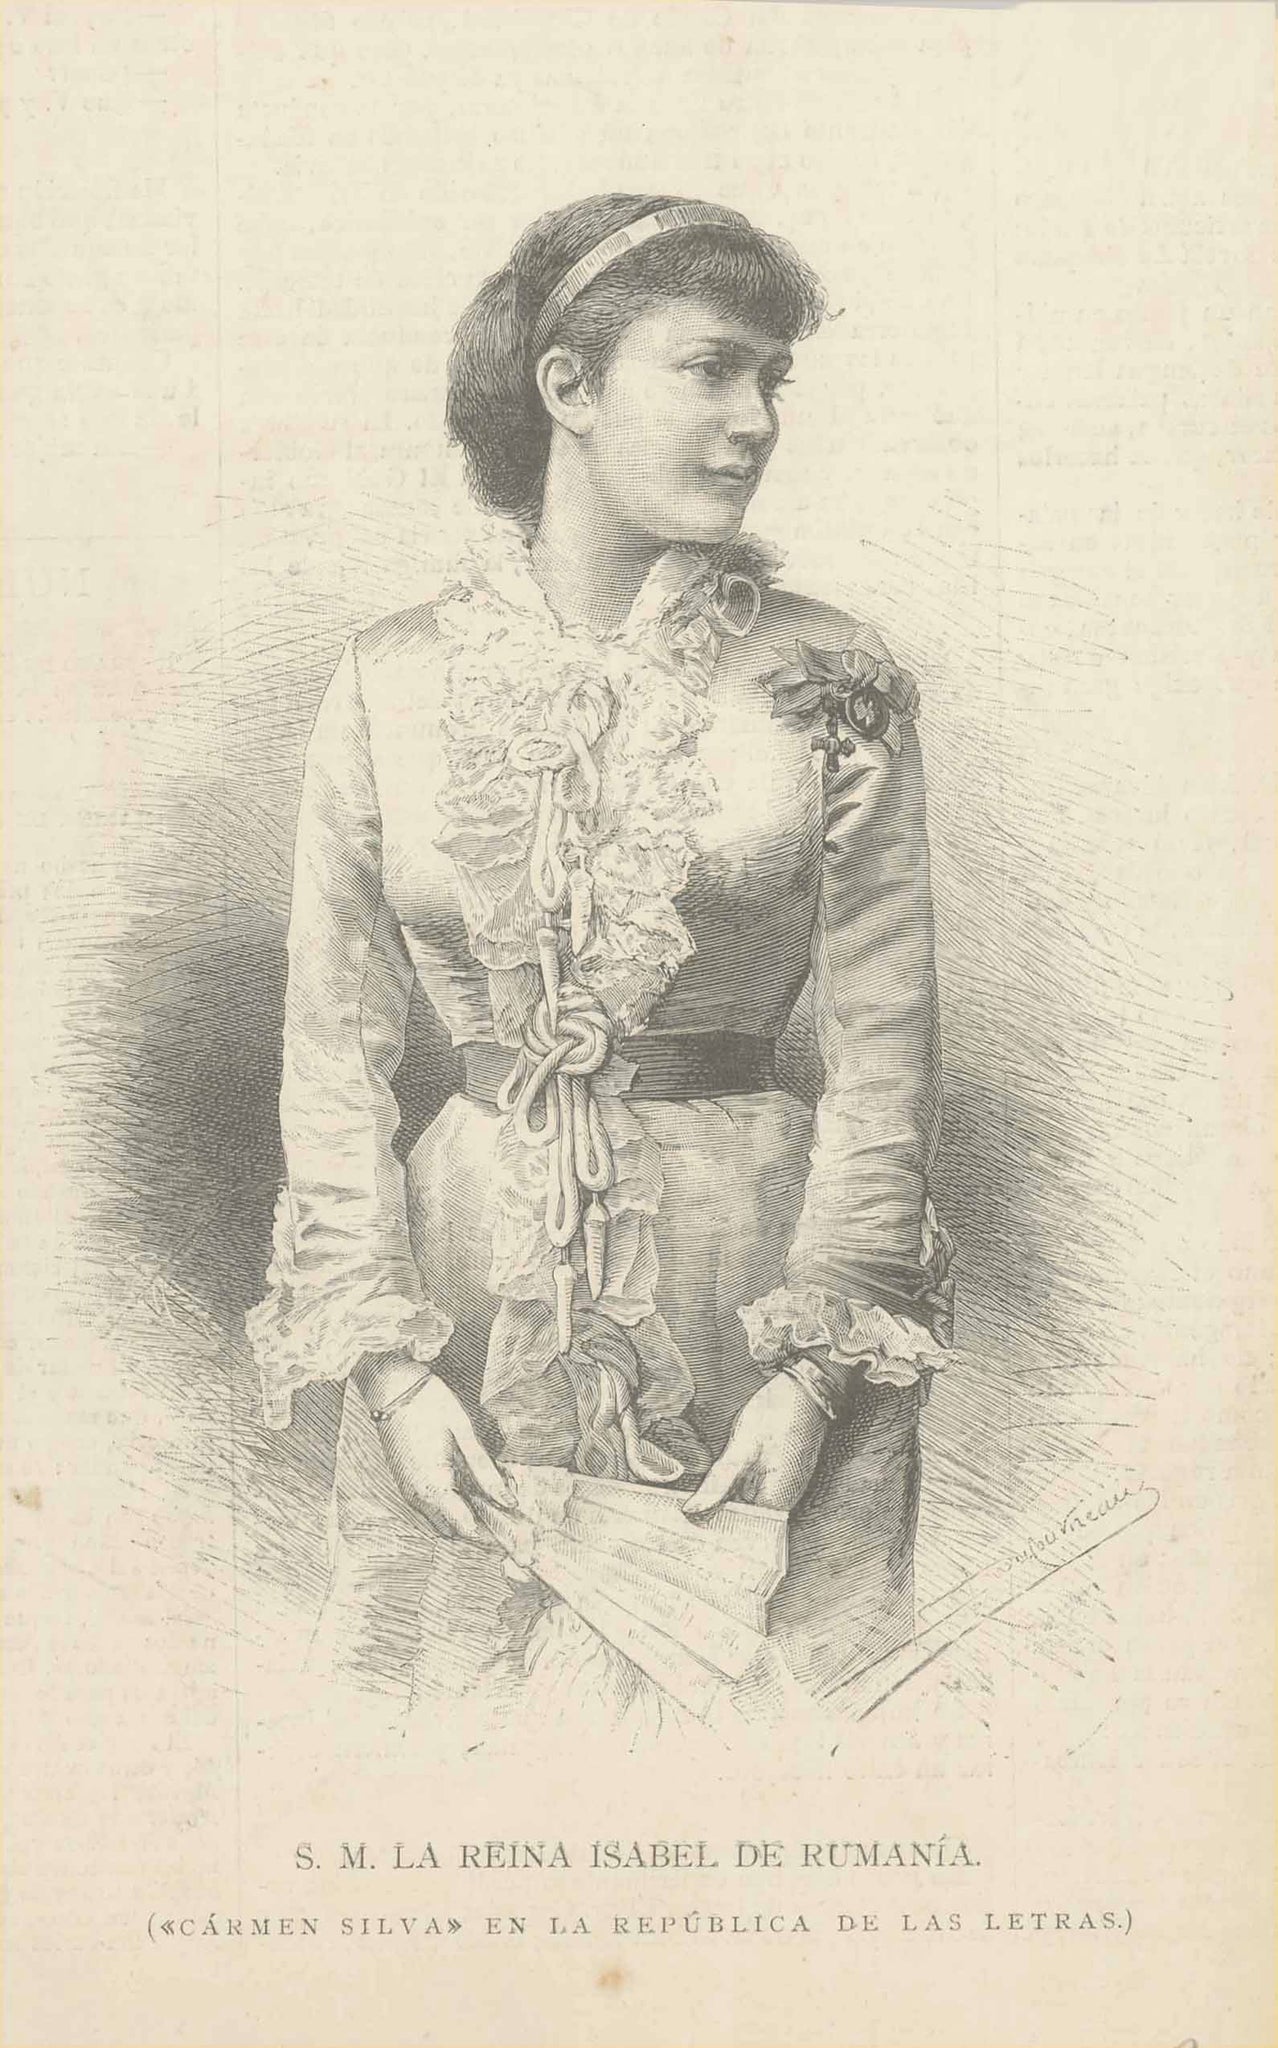 Portraits, Romania, Isabel de Romania, Rumanien, "S. M. Reina Isabel de Rumania"  Wood engraving published 1883 in a Spanish illustrated documentary.